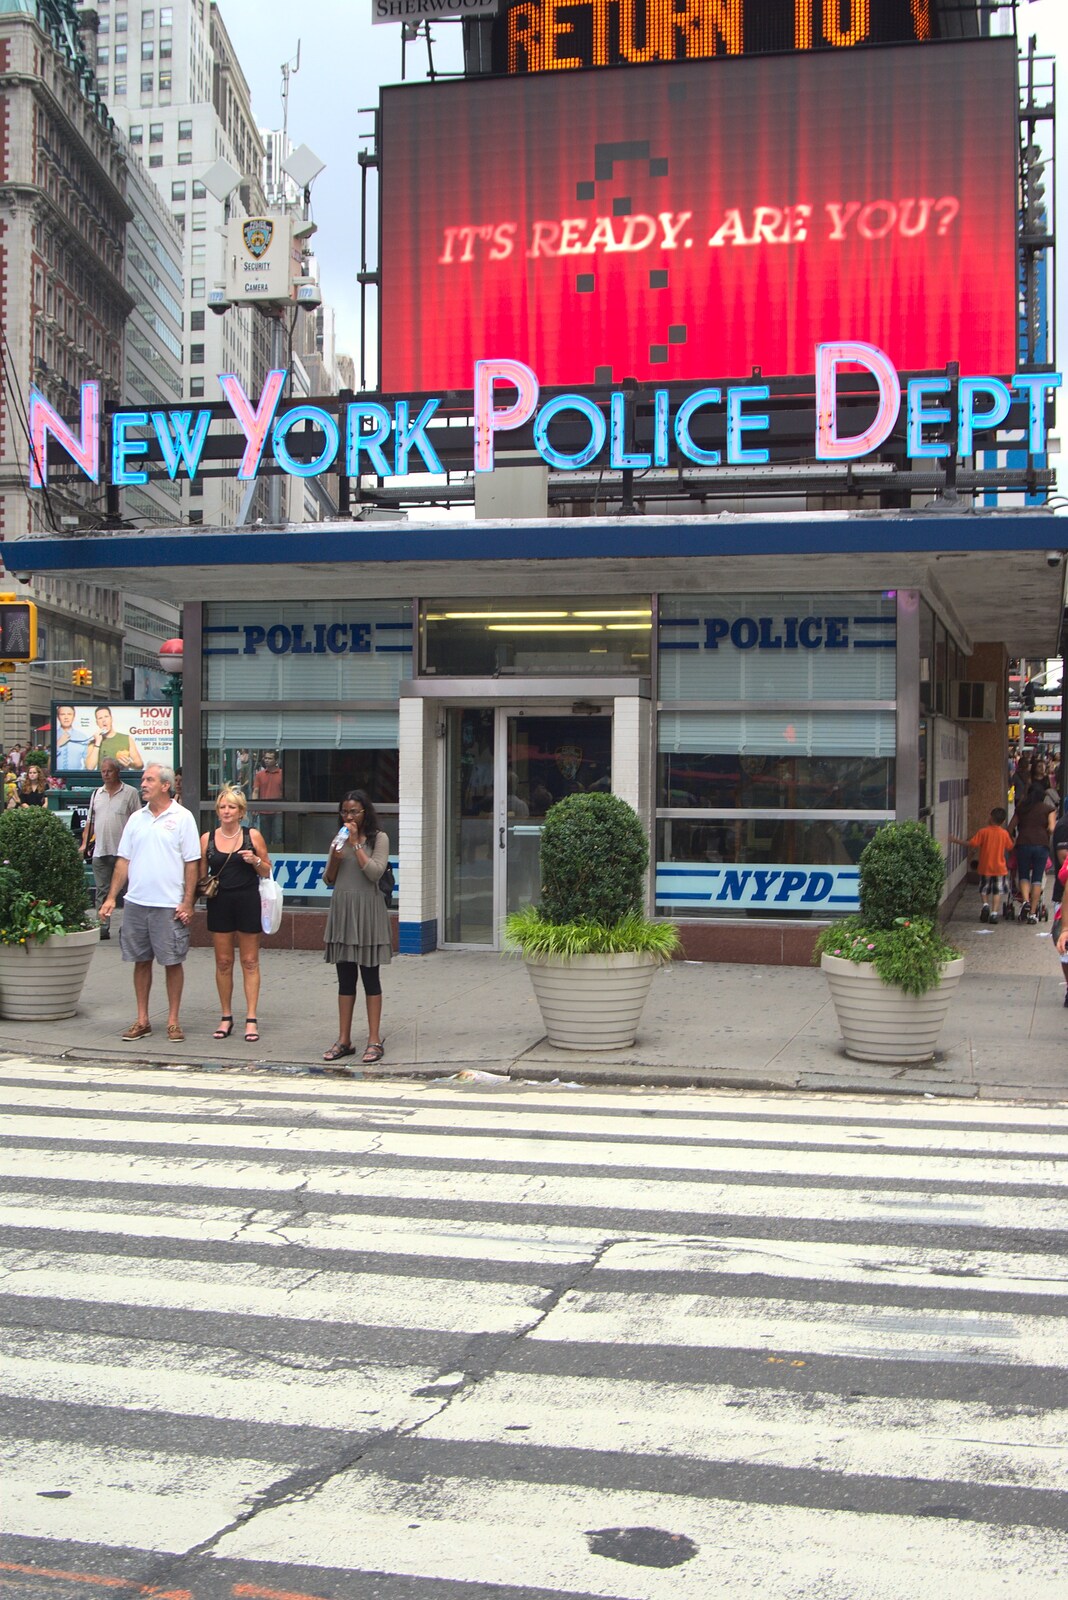 The New York Police Department from A Manhattan Hotdog, New York, USA - 21st August 2011